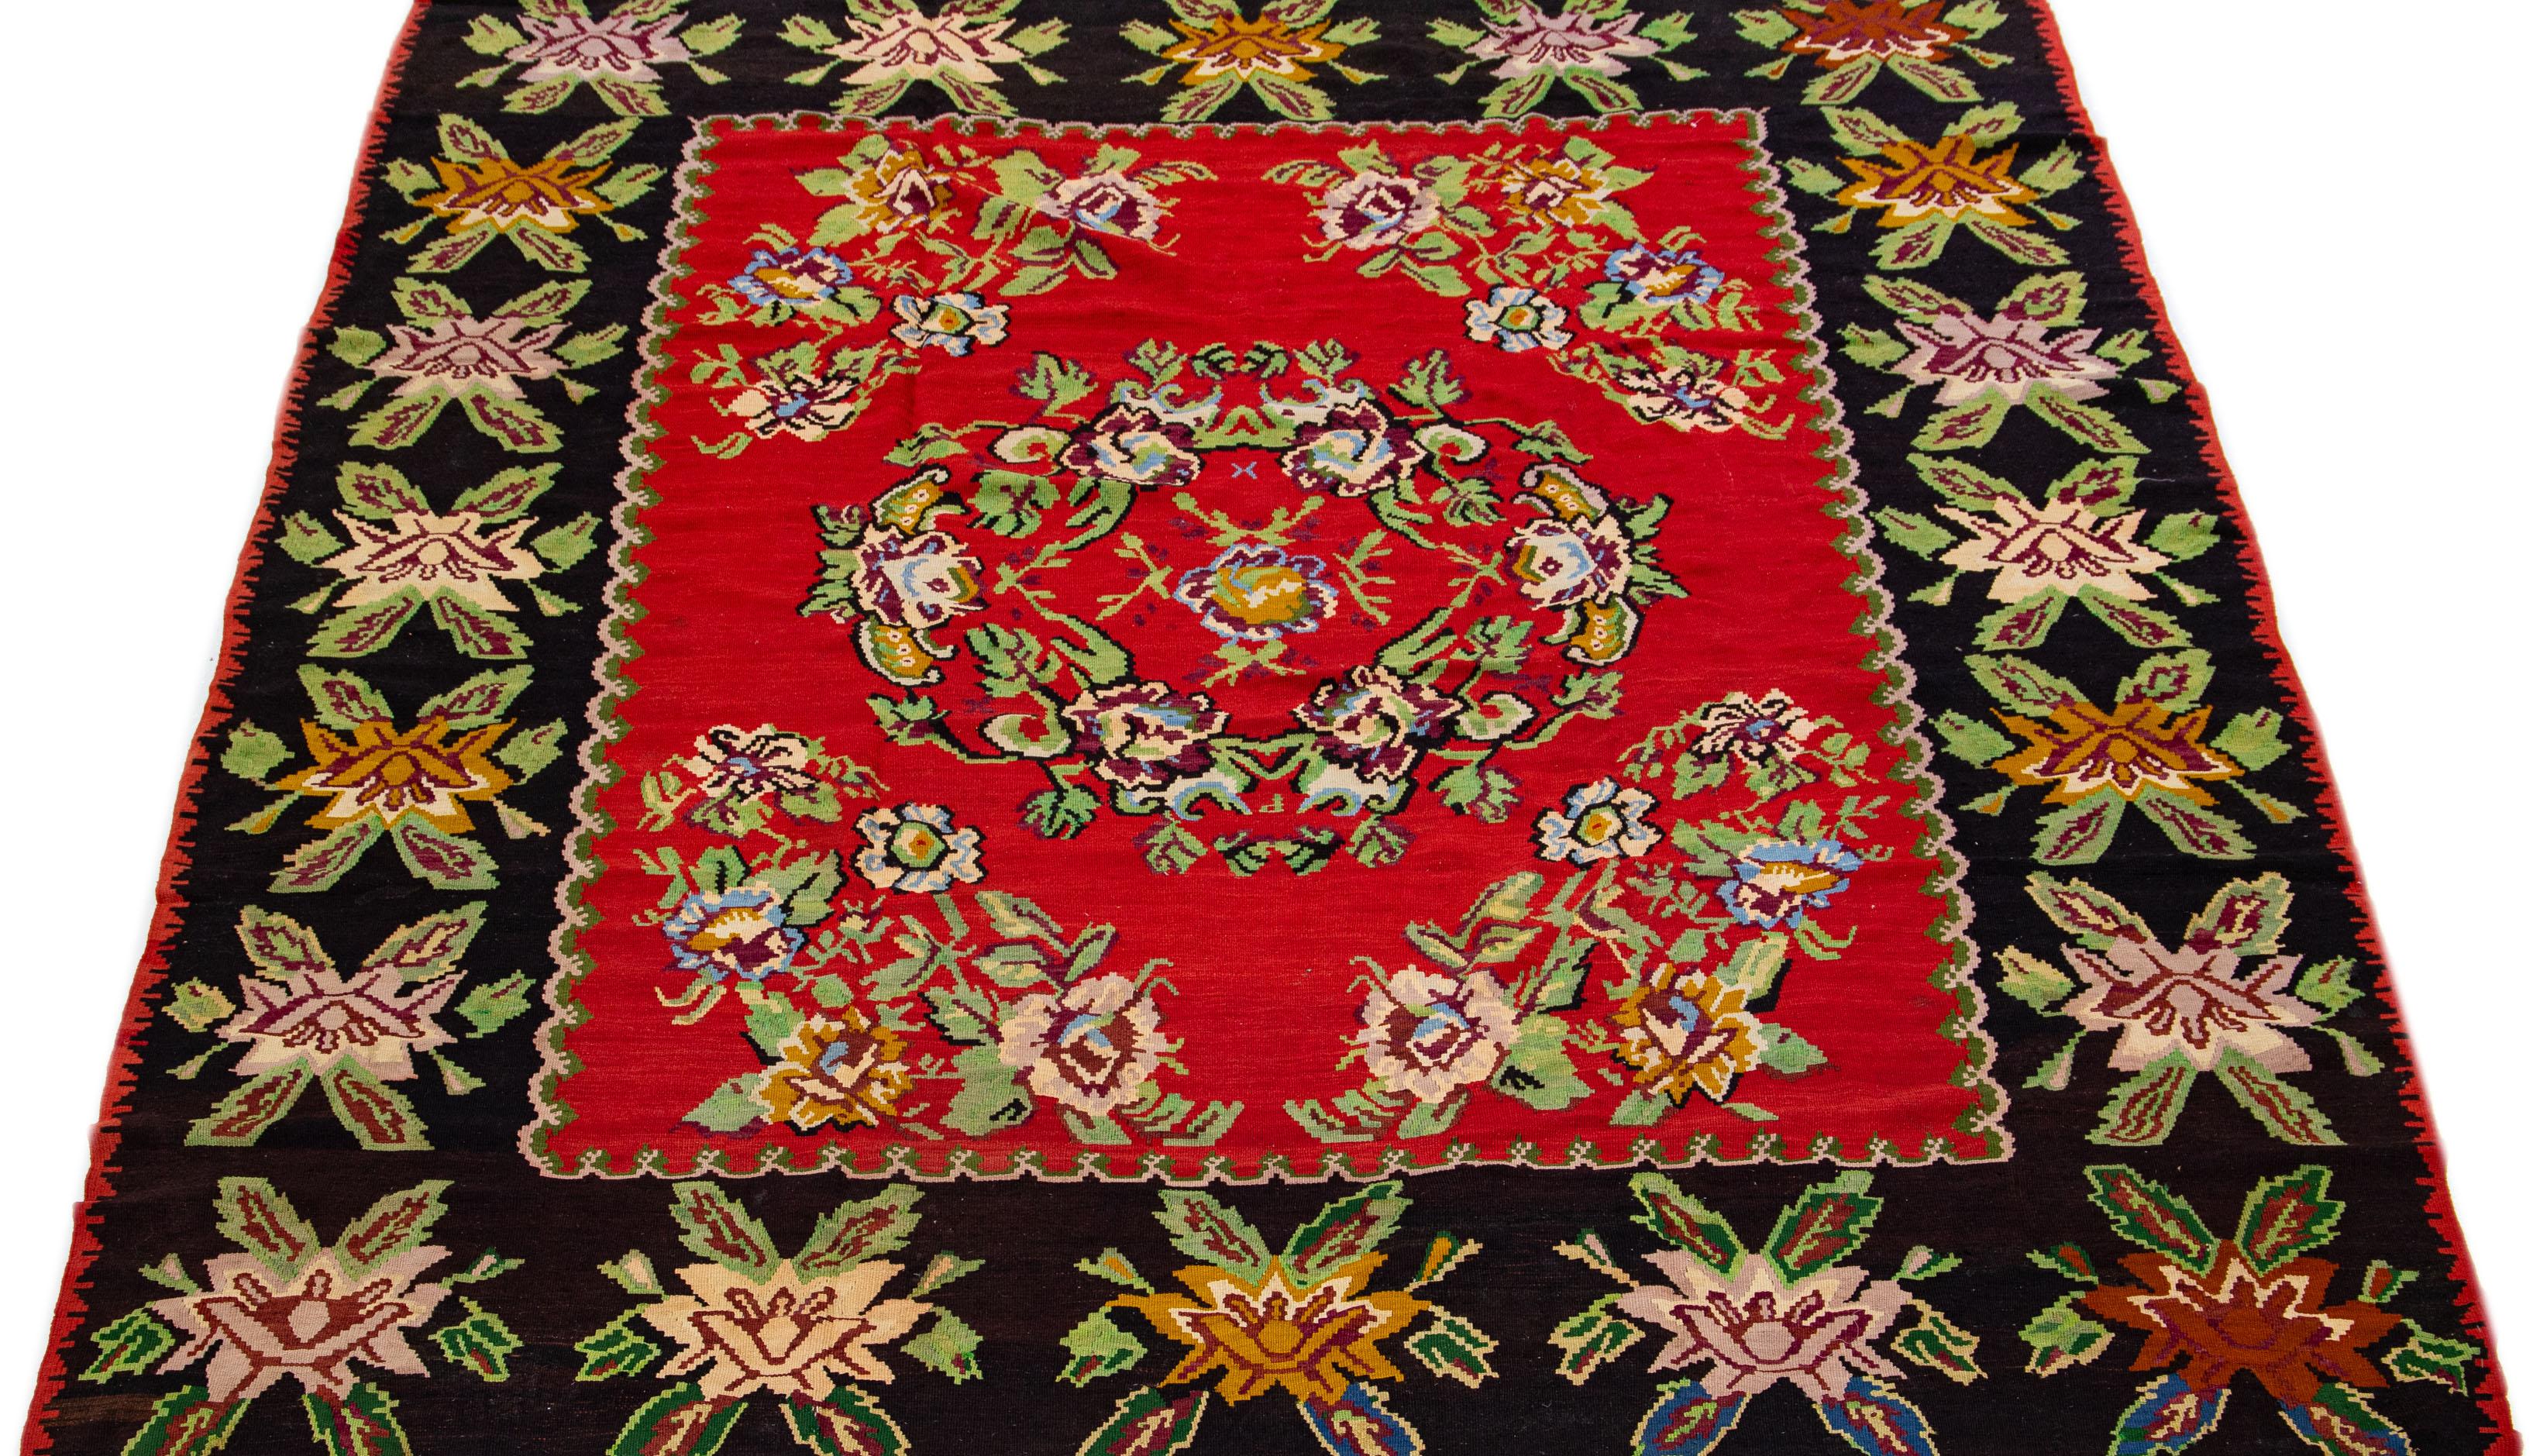 This exquisite Bessarabian Style Kilim rug features a striking floral pattern showcased against a rich red backdrop. The charming accents of green, blue, pink, and black add a delightful touch of color to this meticulously hand-knotted